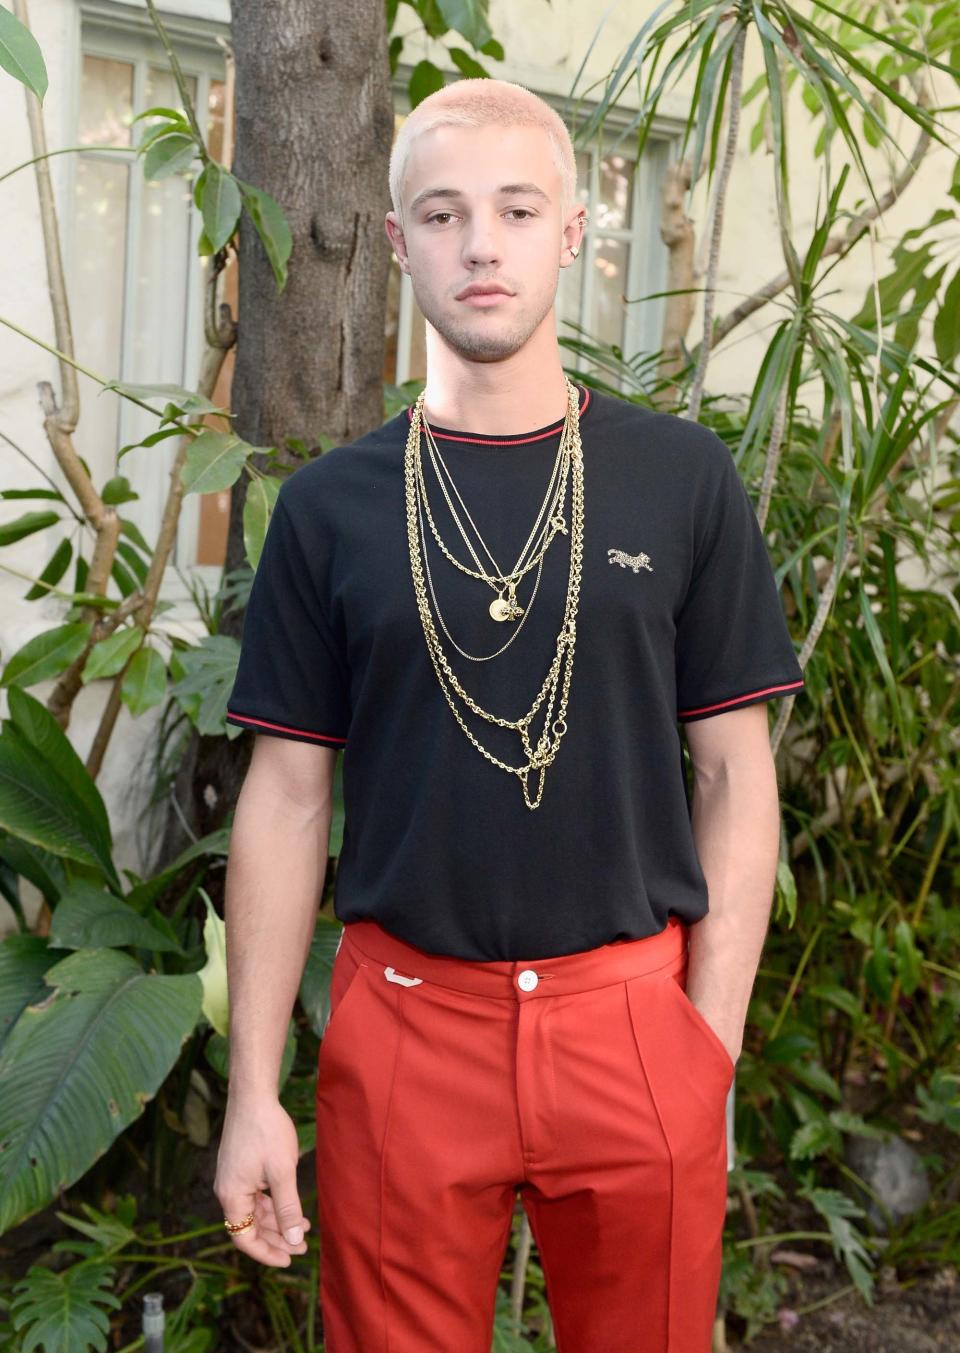 Cameron Dallas in Ovadia & Sons and Hoorsenbuhs jewelry